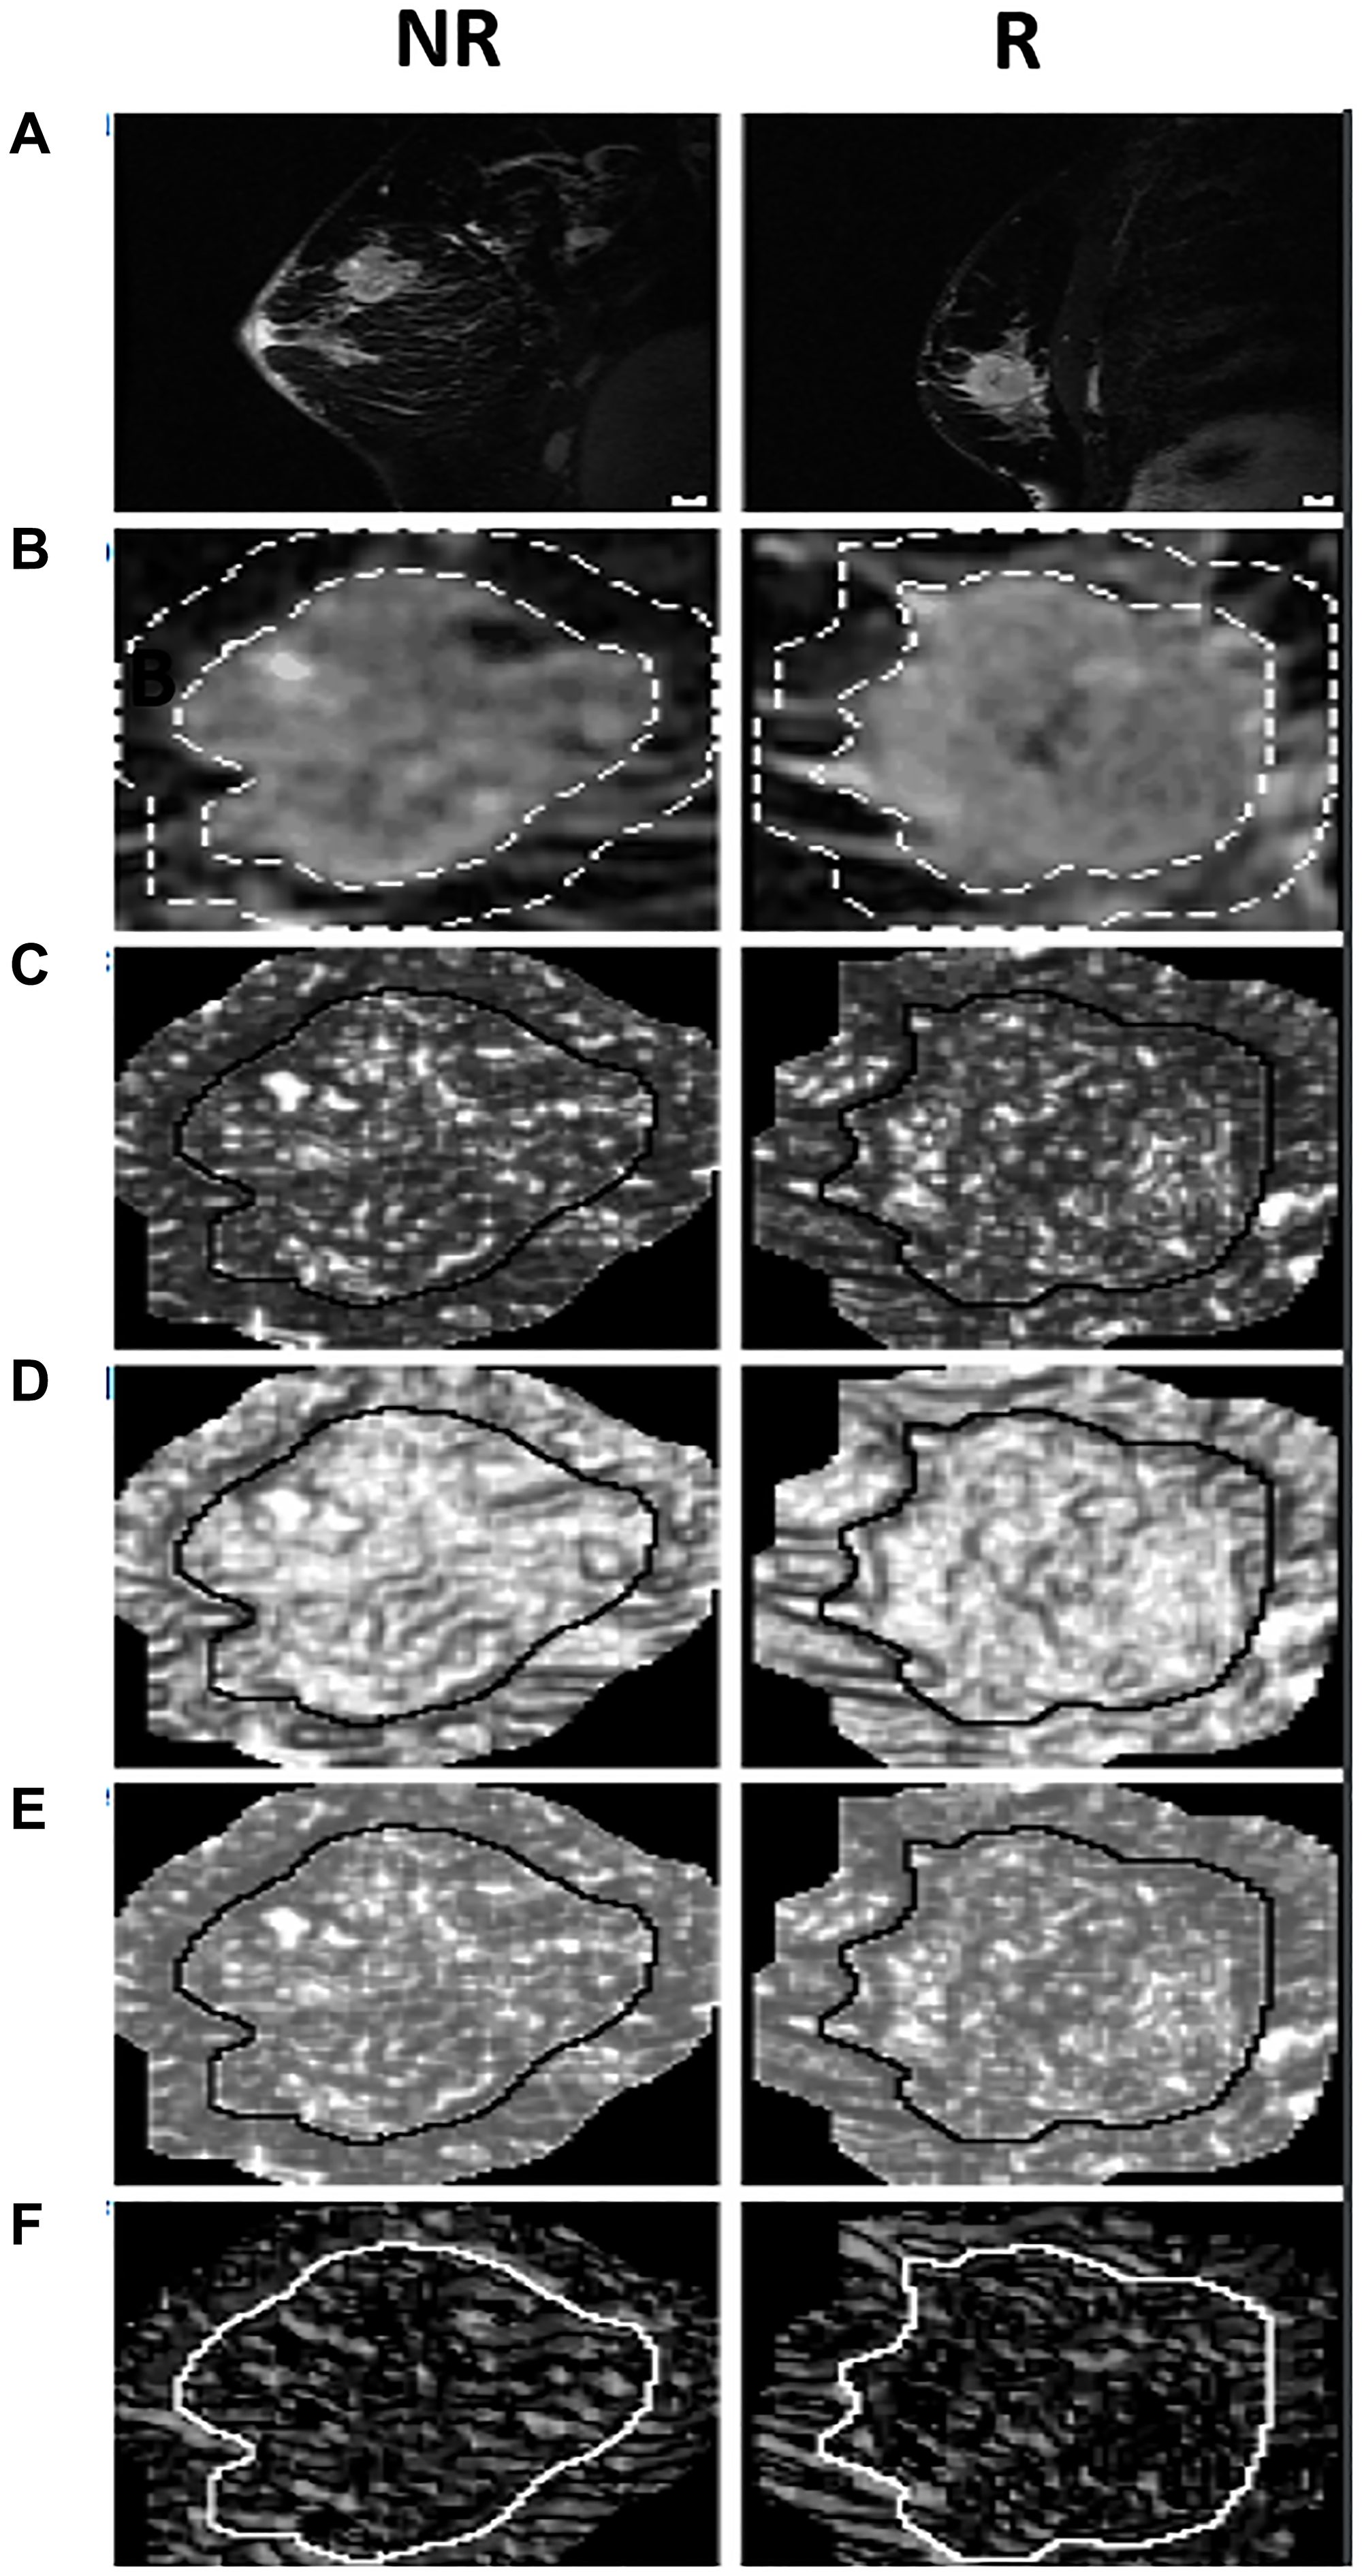 The MRI, quantized tumor ROI, and texture feature images for a typical NR and R.